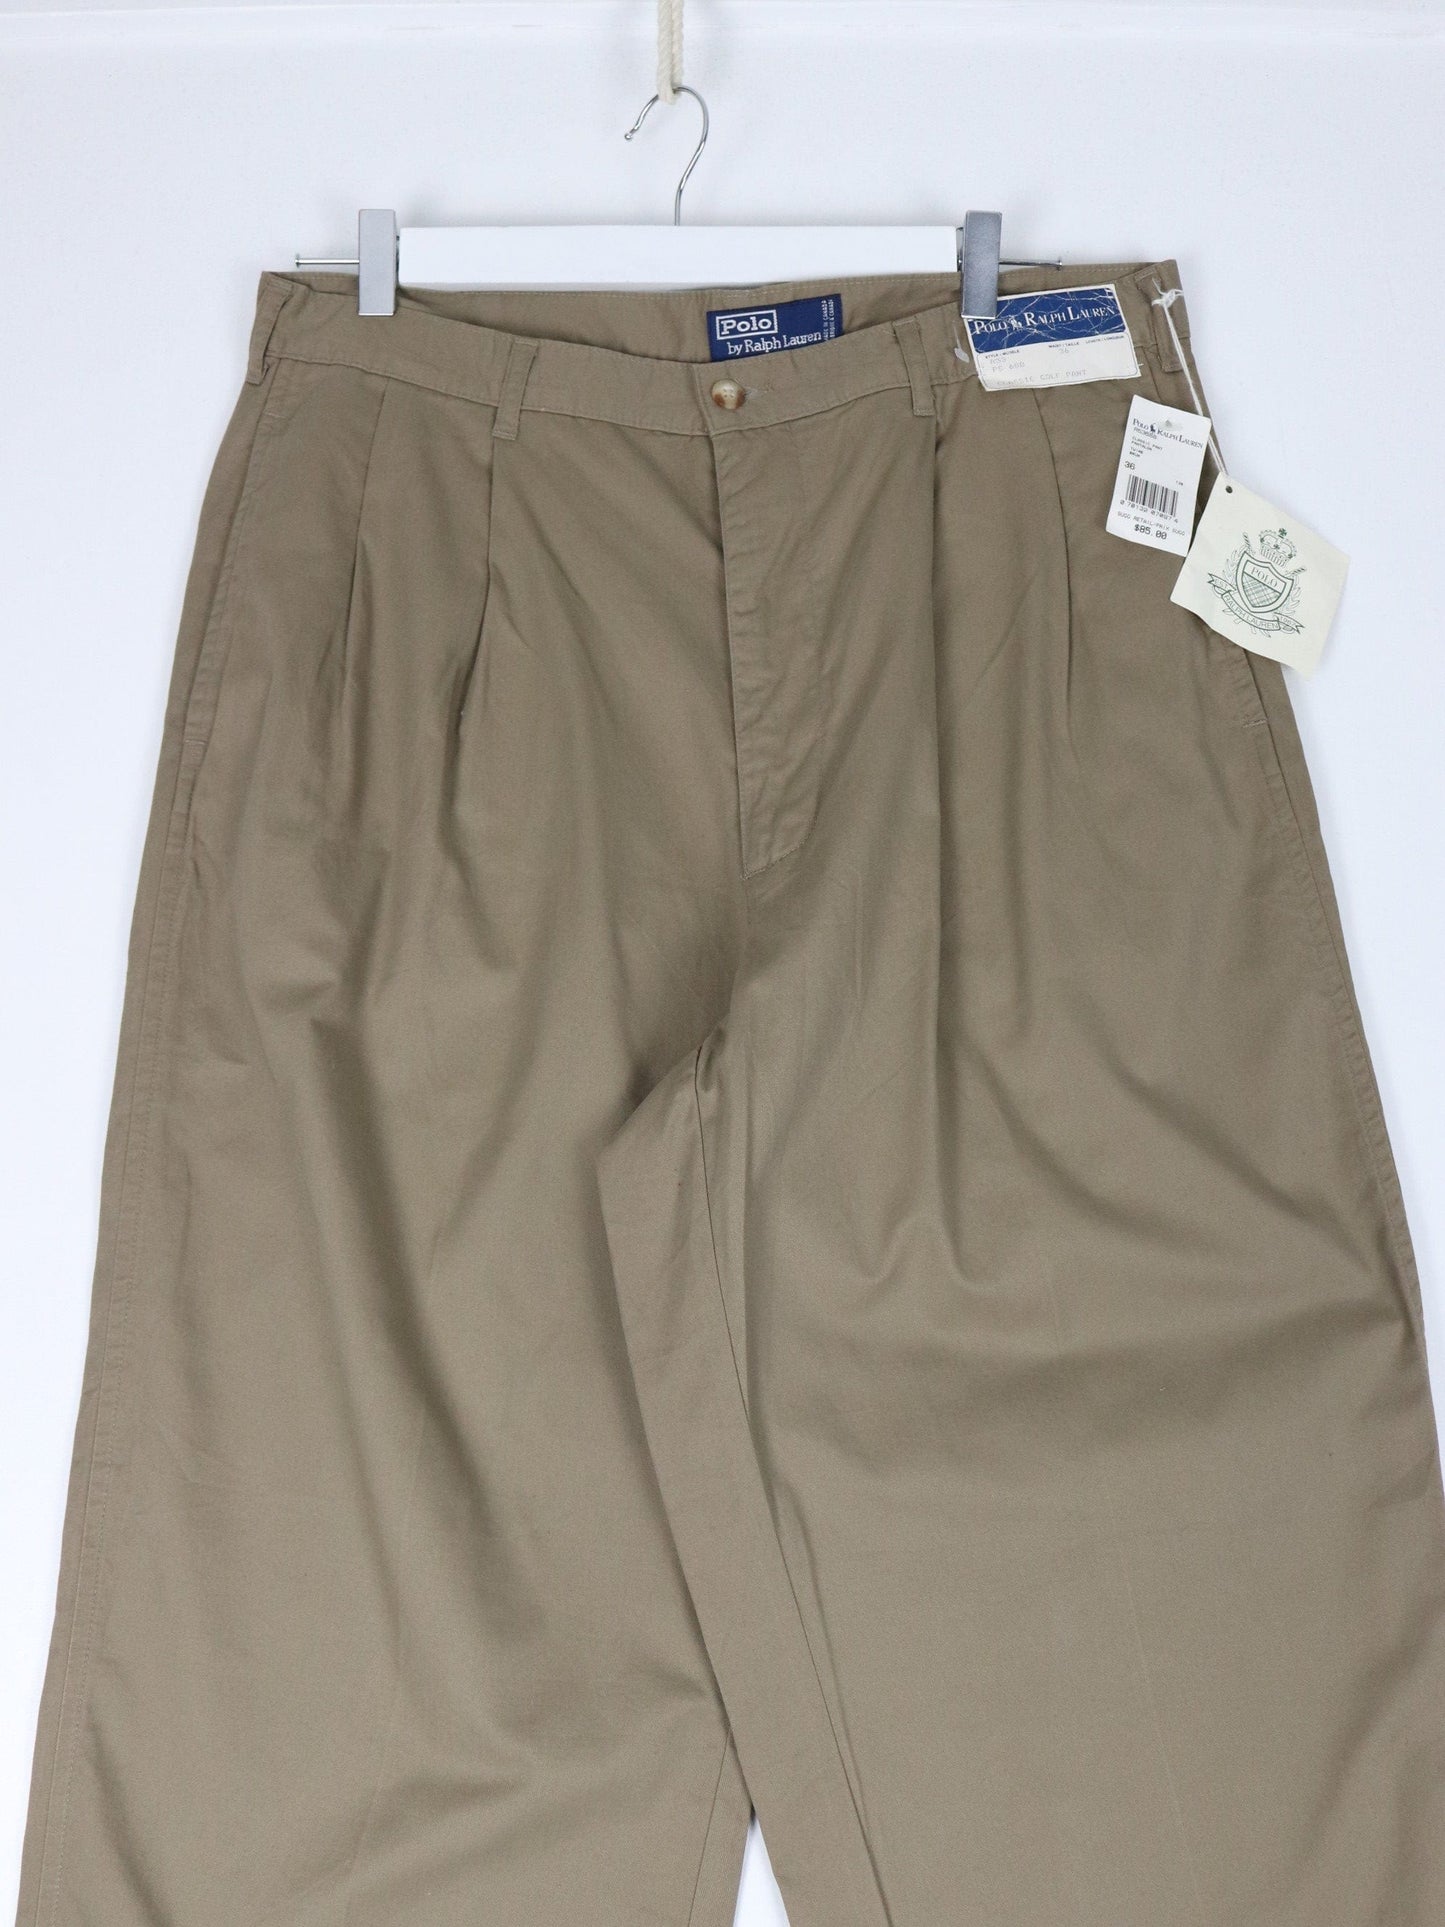 Polo Pants Vintage Polo Ralph Lauren Pants Fits Mens 35 x 34 Brown Golf Chino Trousers